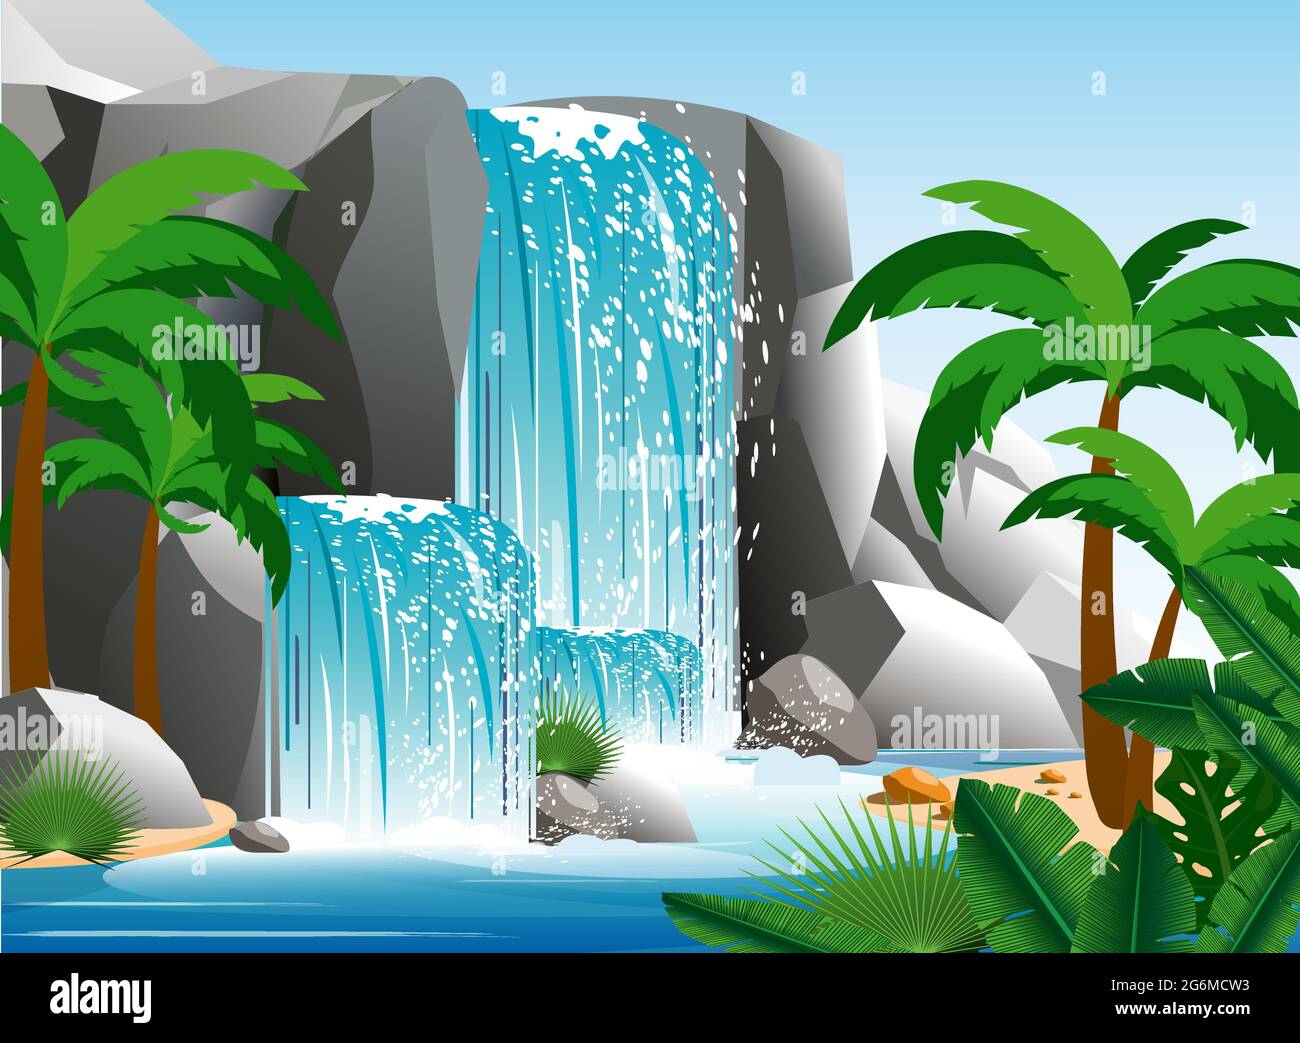 Vector illustration of beautiful waterfall in tropical jungle landscape with trees, rocks and sky. Green palm wood with wild nature and bush foliage Stock Vector